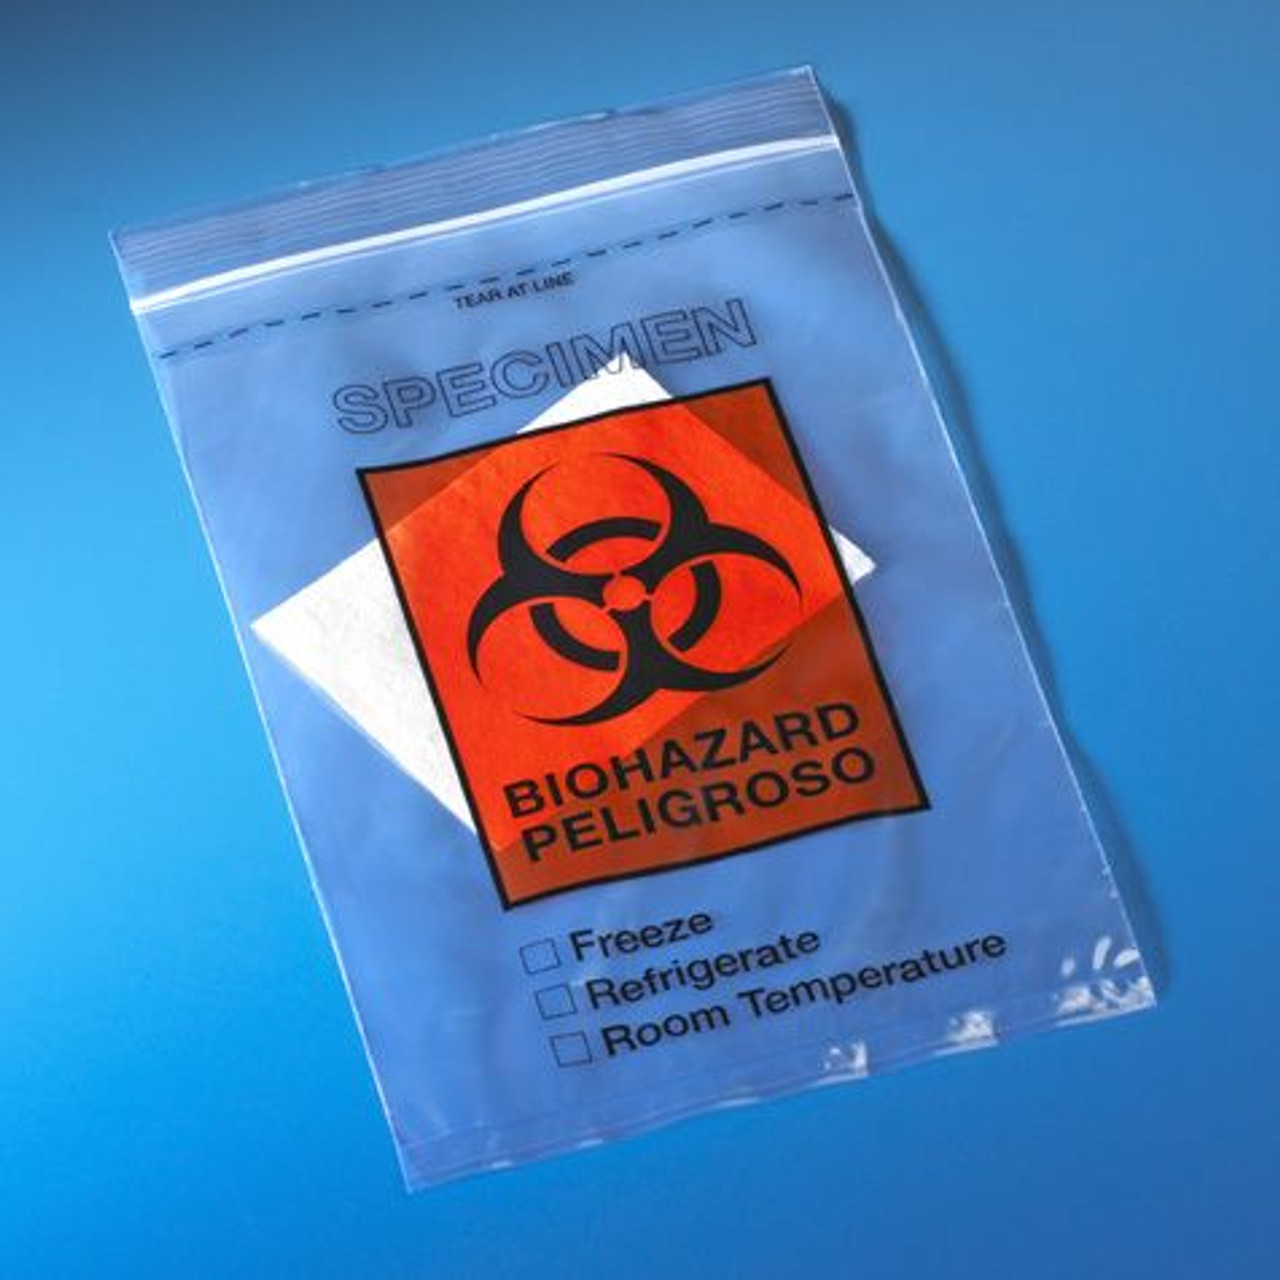 https://cdn11.bigcommerce.com/s-w9bdixgj/images/stencil/1280x1280/products/3562/8033/6_x_9_Biohazard_Bag_with_Ziploc_for_Storing_and_Shipping_Patient_Samples_and_Hazardous_Materials_Without_Leaking_-_Lab_Safety_Supplies_-_Stellar_Scientific__06176.1602015730.jpg?c=2